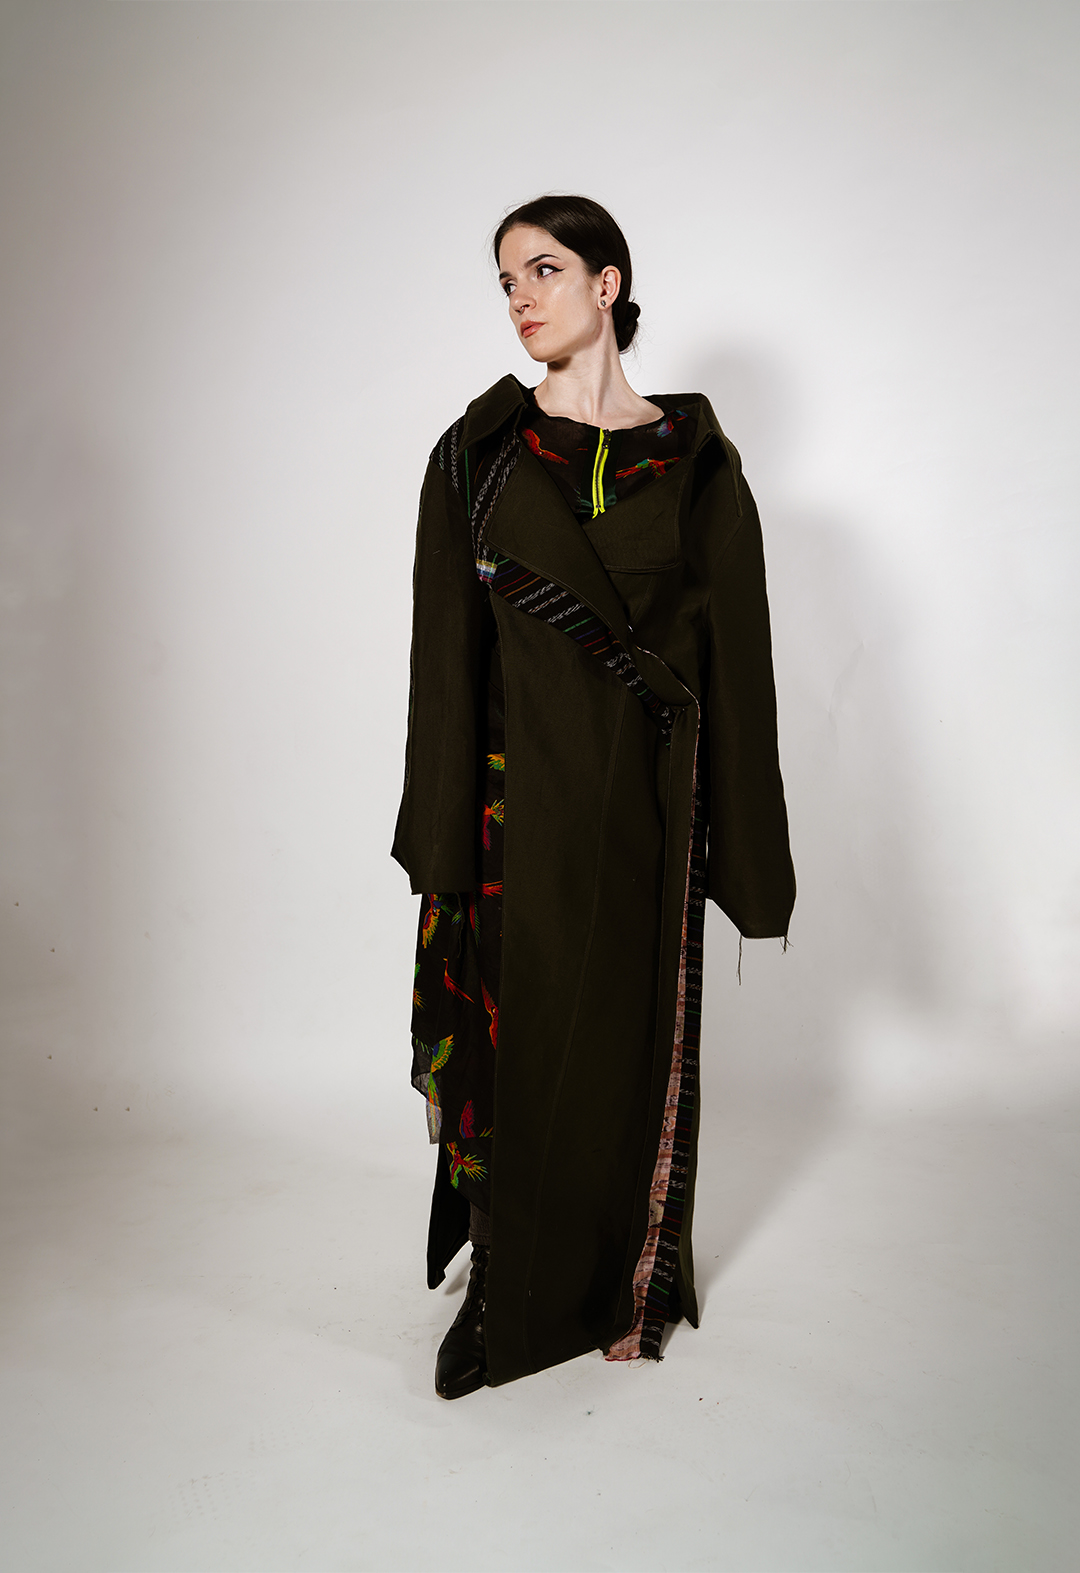 This is a colorful artisanal Mayan textile deconstructed trench and matching skirt in army-green silk wool. I draw from the vibrant textiles of Guatemala to create pieces that represent the strength and cultural identity of the Mayan people amid the dissolution of their homelands.